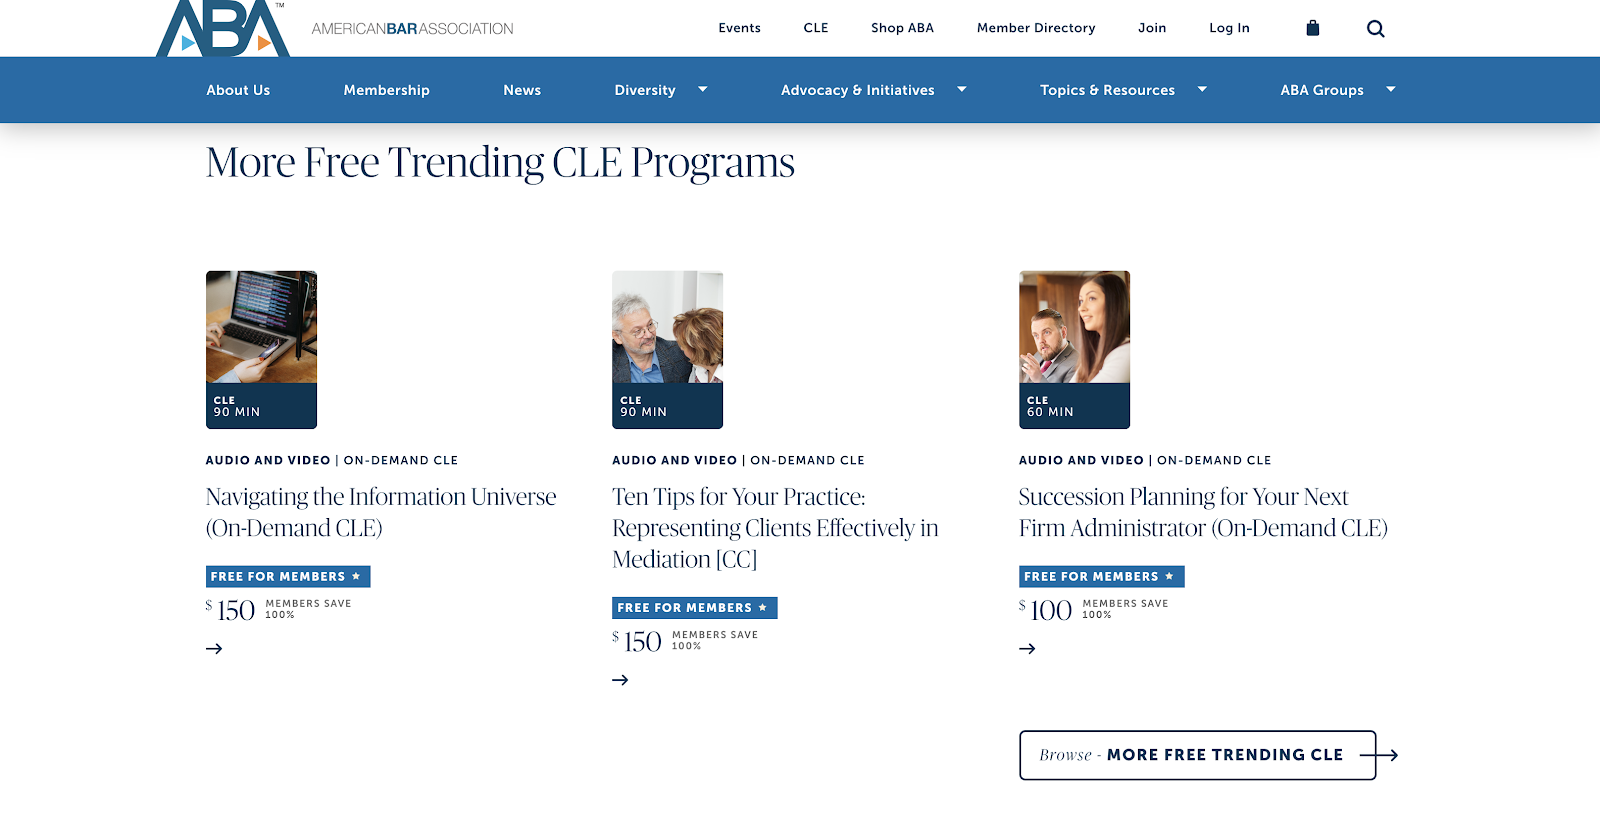 More Free Trending CLE Programs